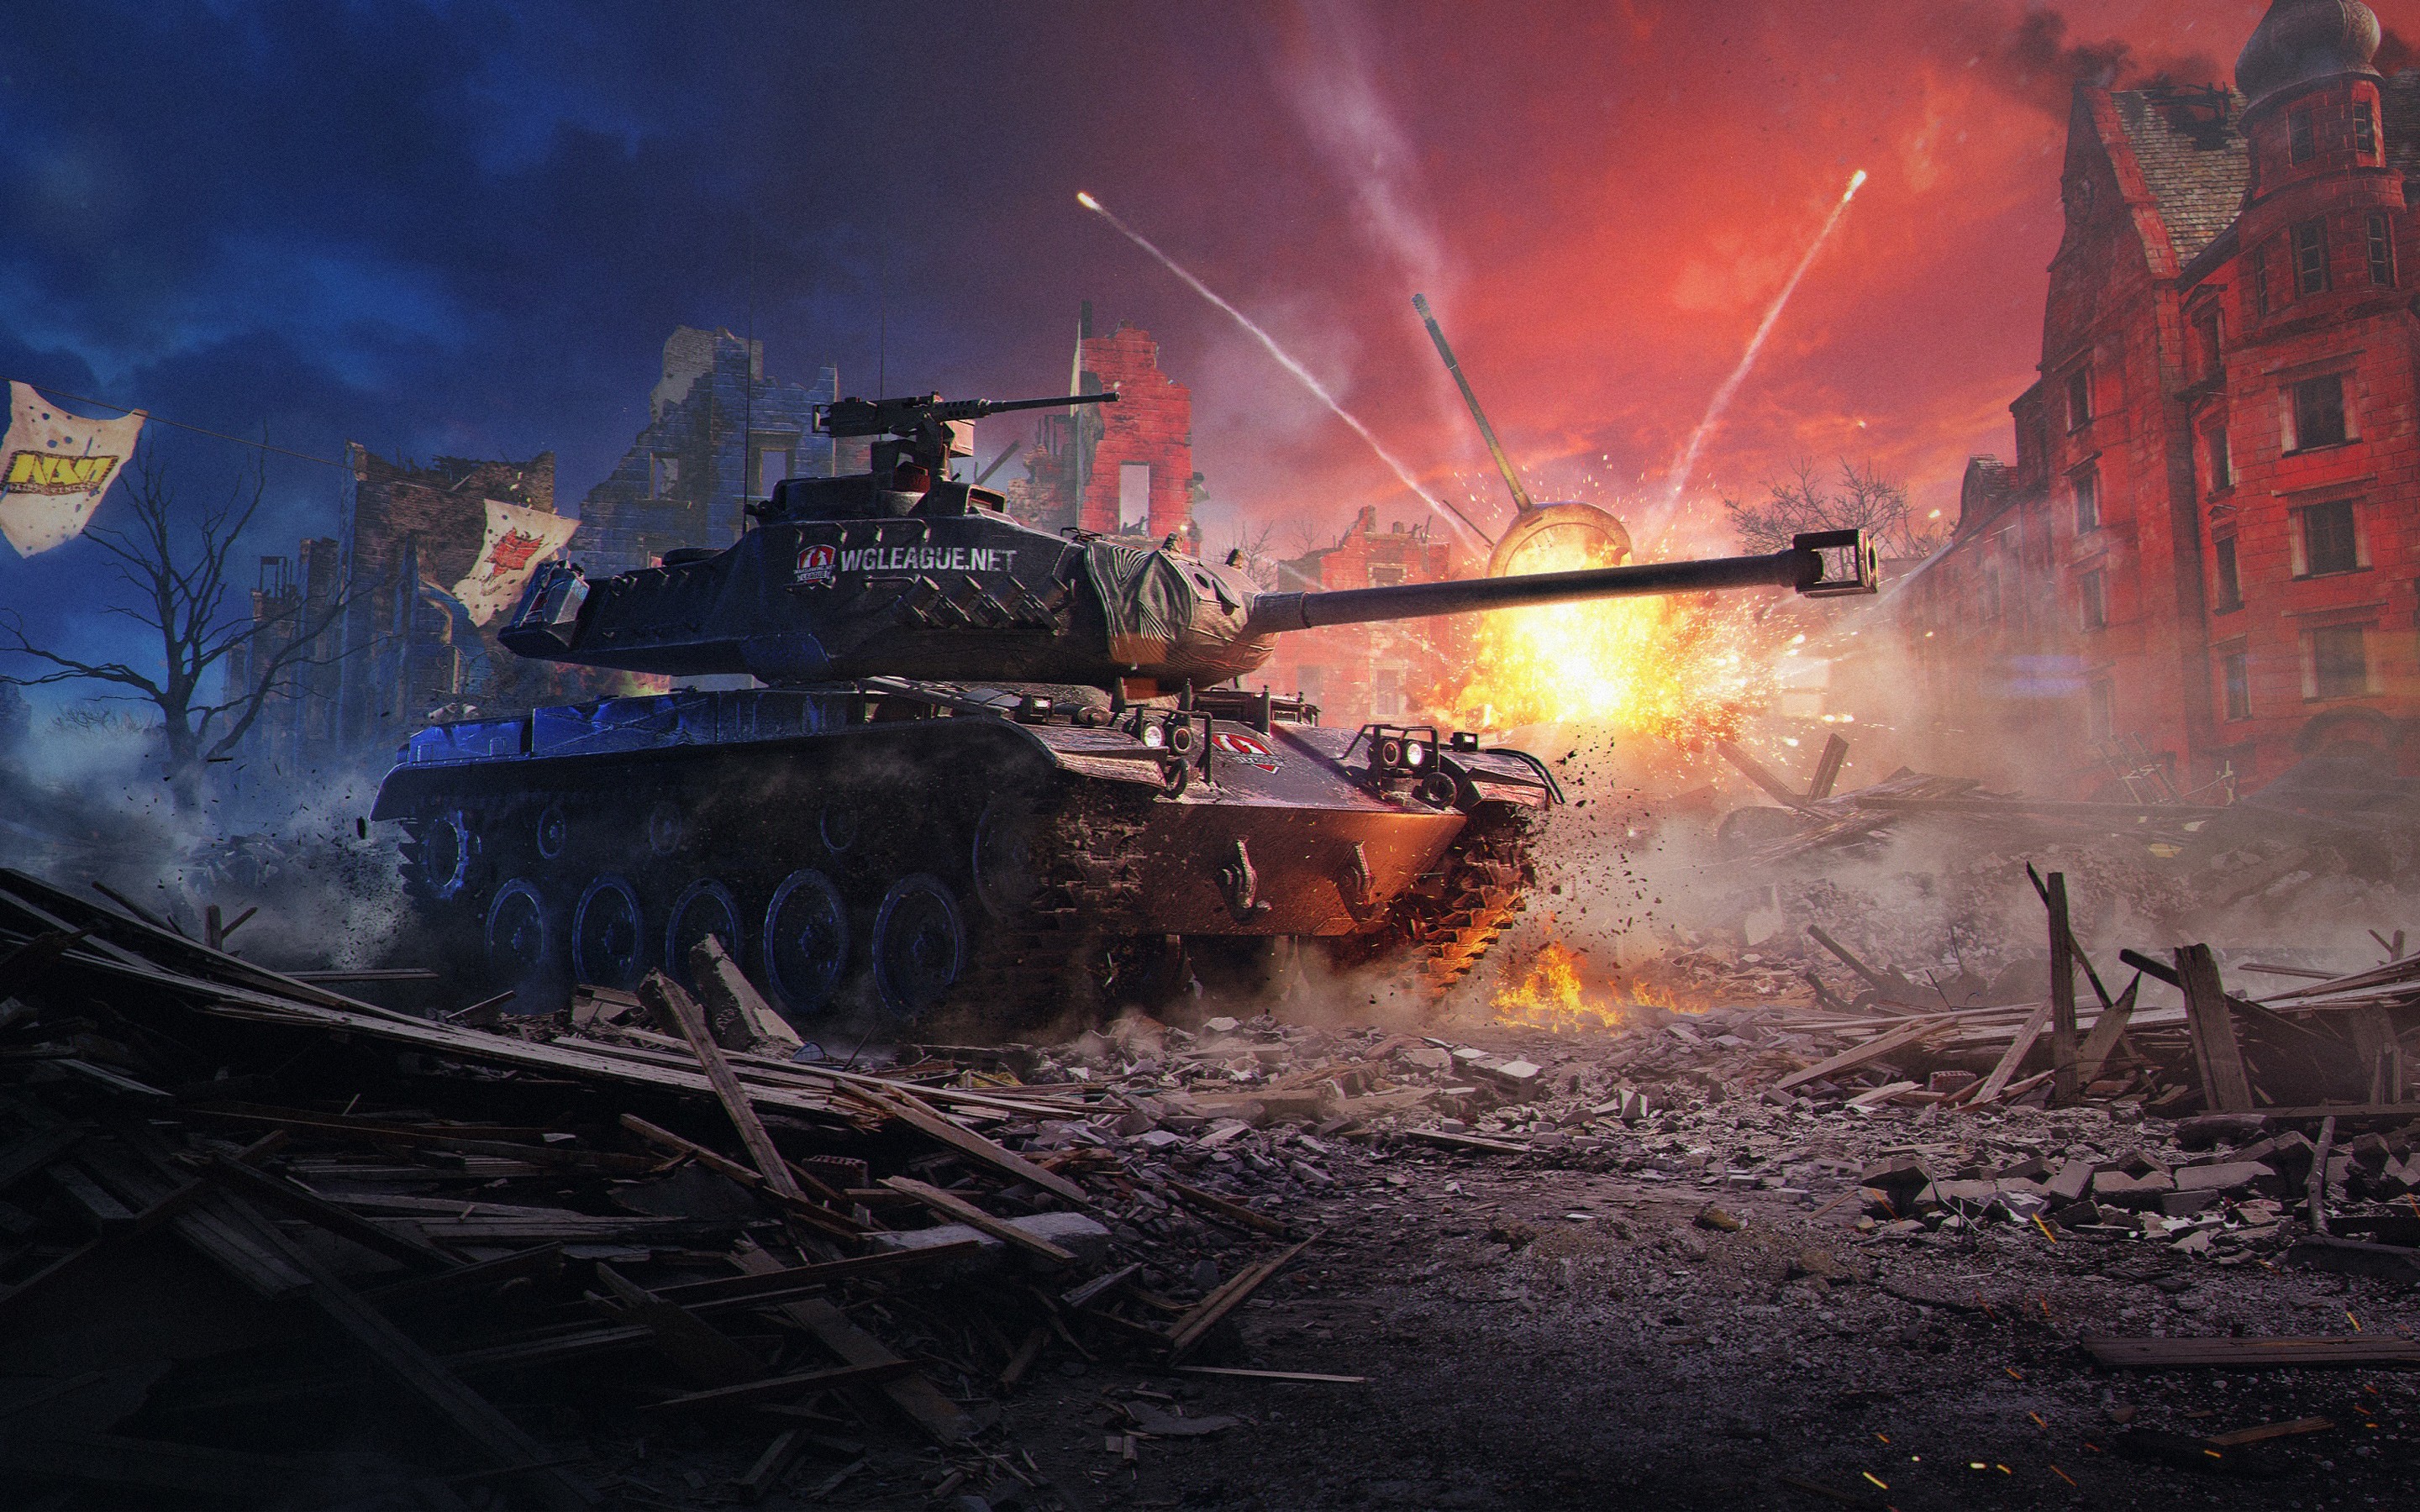 world of tanks wallpaper hd,action adventure game,strategy video game,pc game,combat vehicle,tank